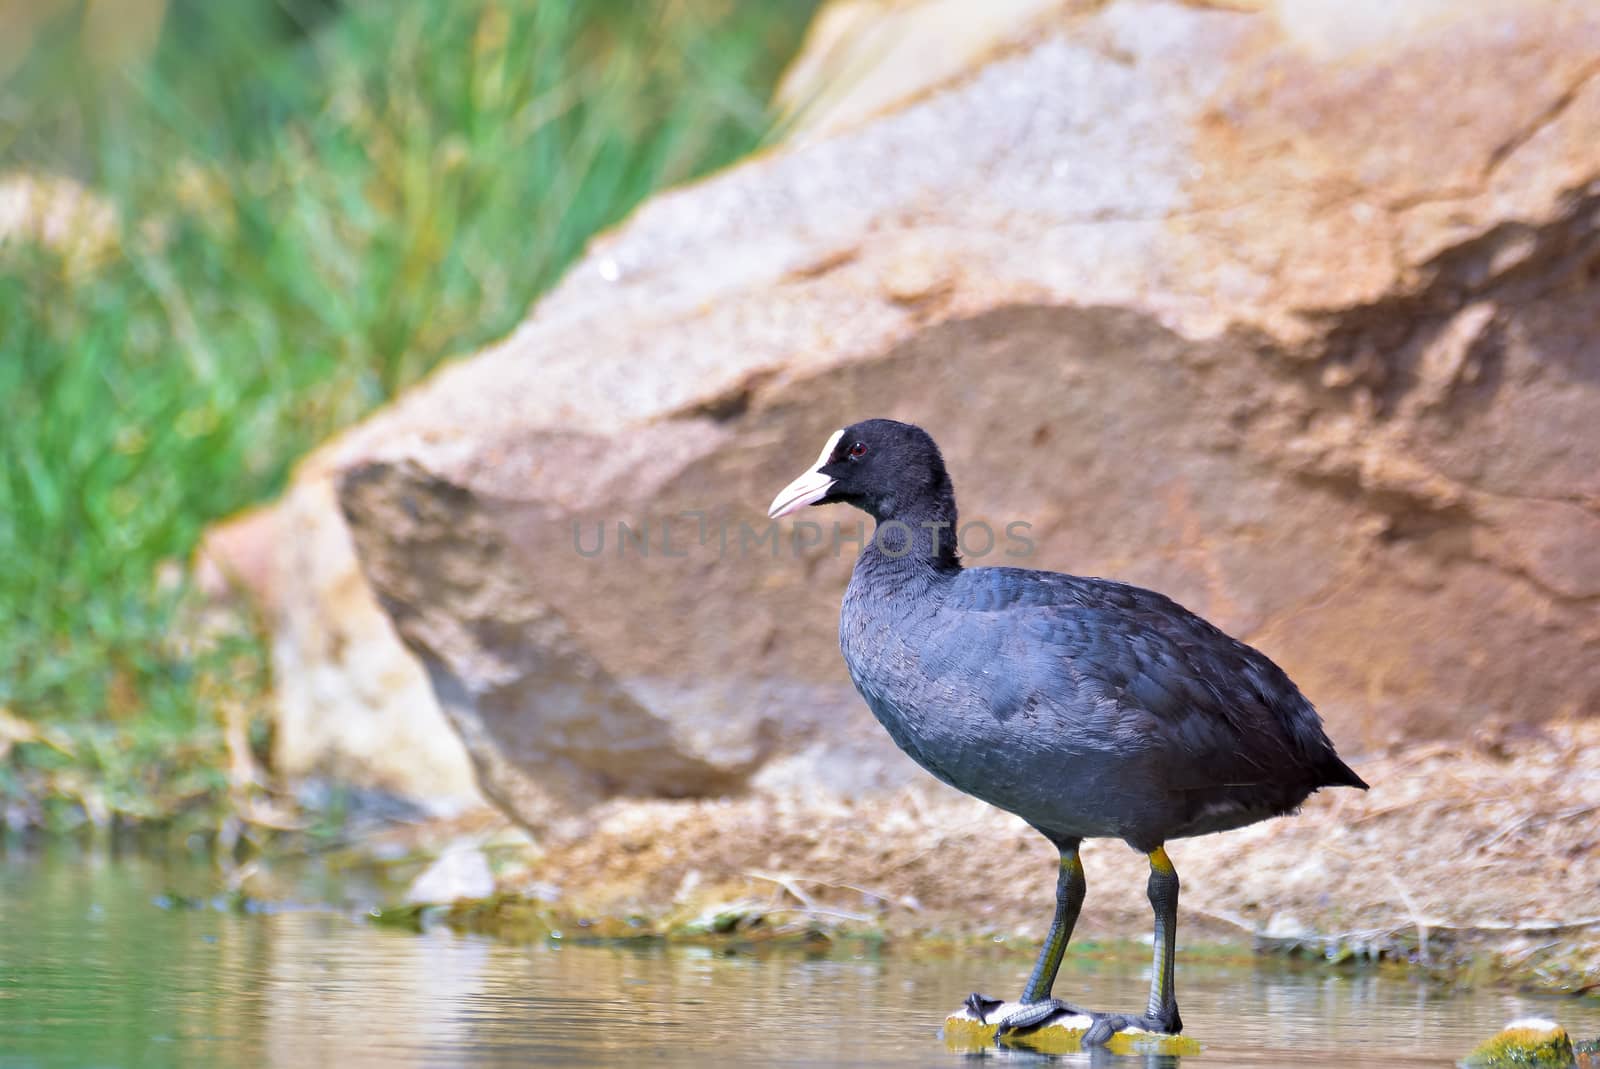 The Eurasian coot, also known as the common coot, or Australian coot, is a member of the rail and crake bird family, the Rallidae.